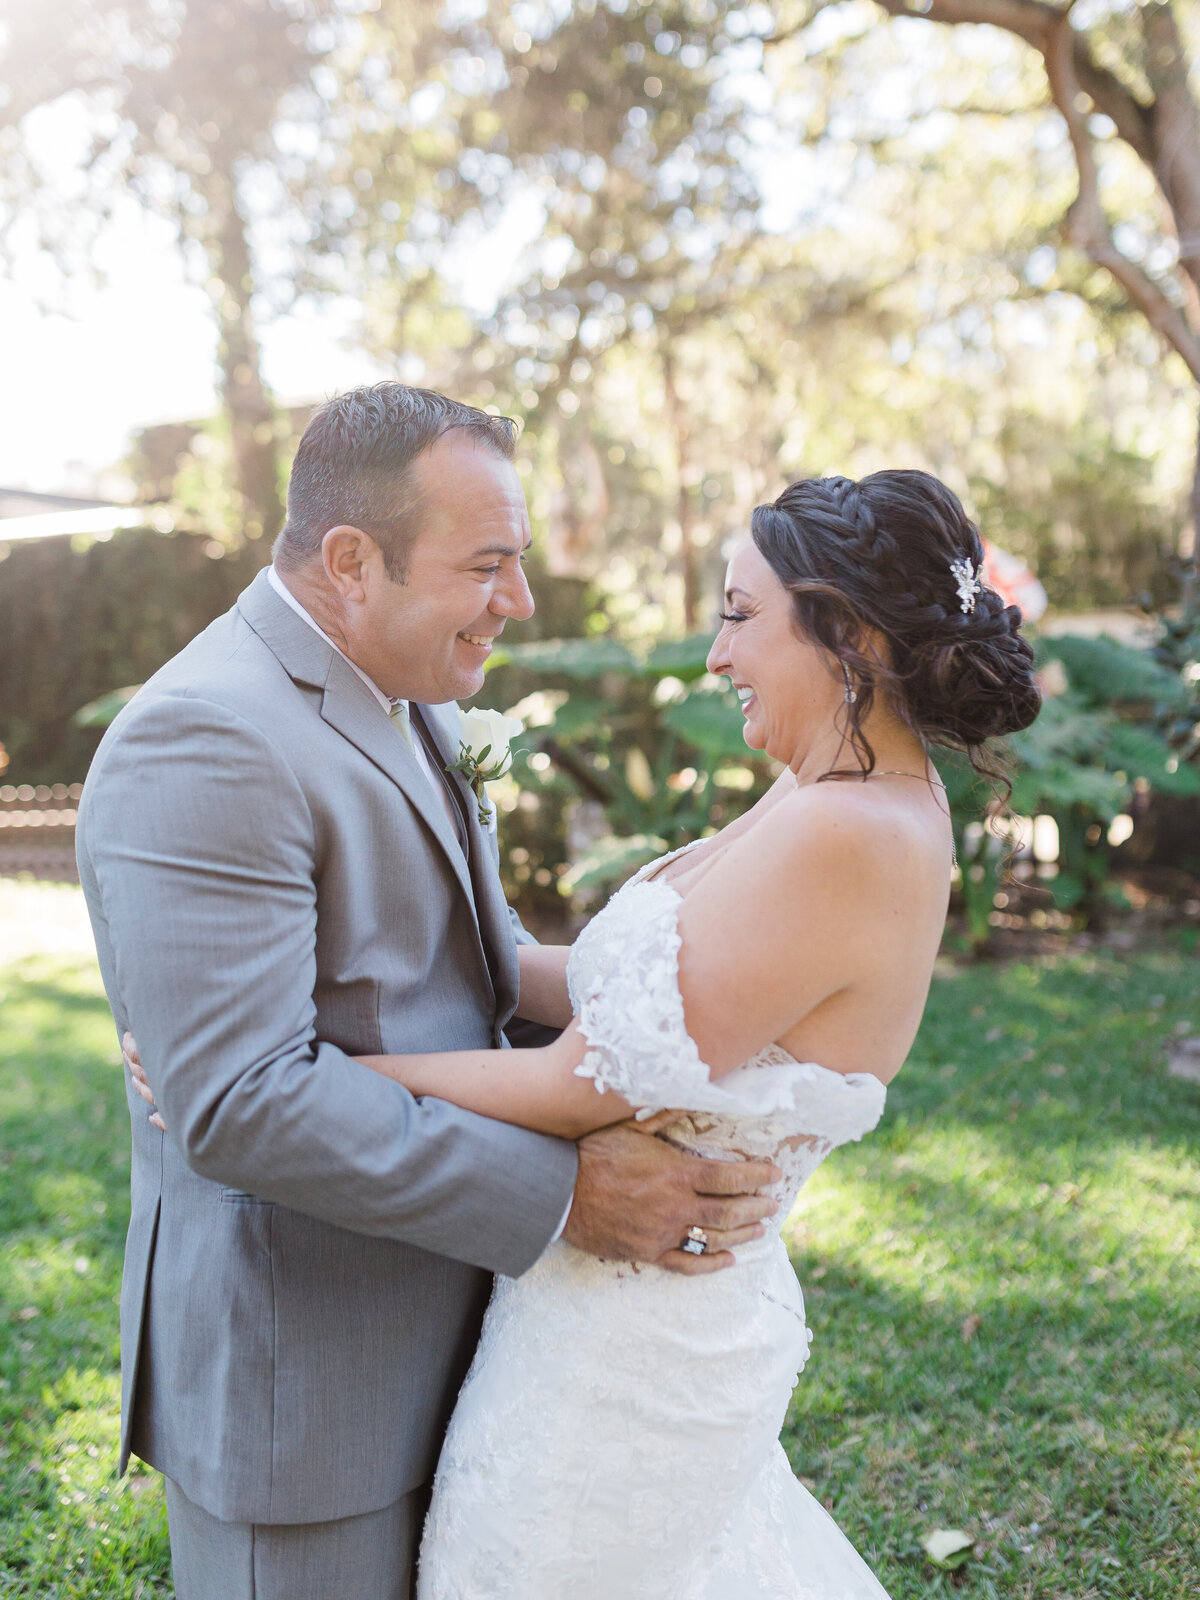 CAPTURED BY LAU PHOTOGRAPHY. Christina and John fountain of youth wedding st augustine fl-5476